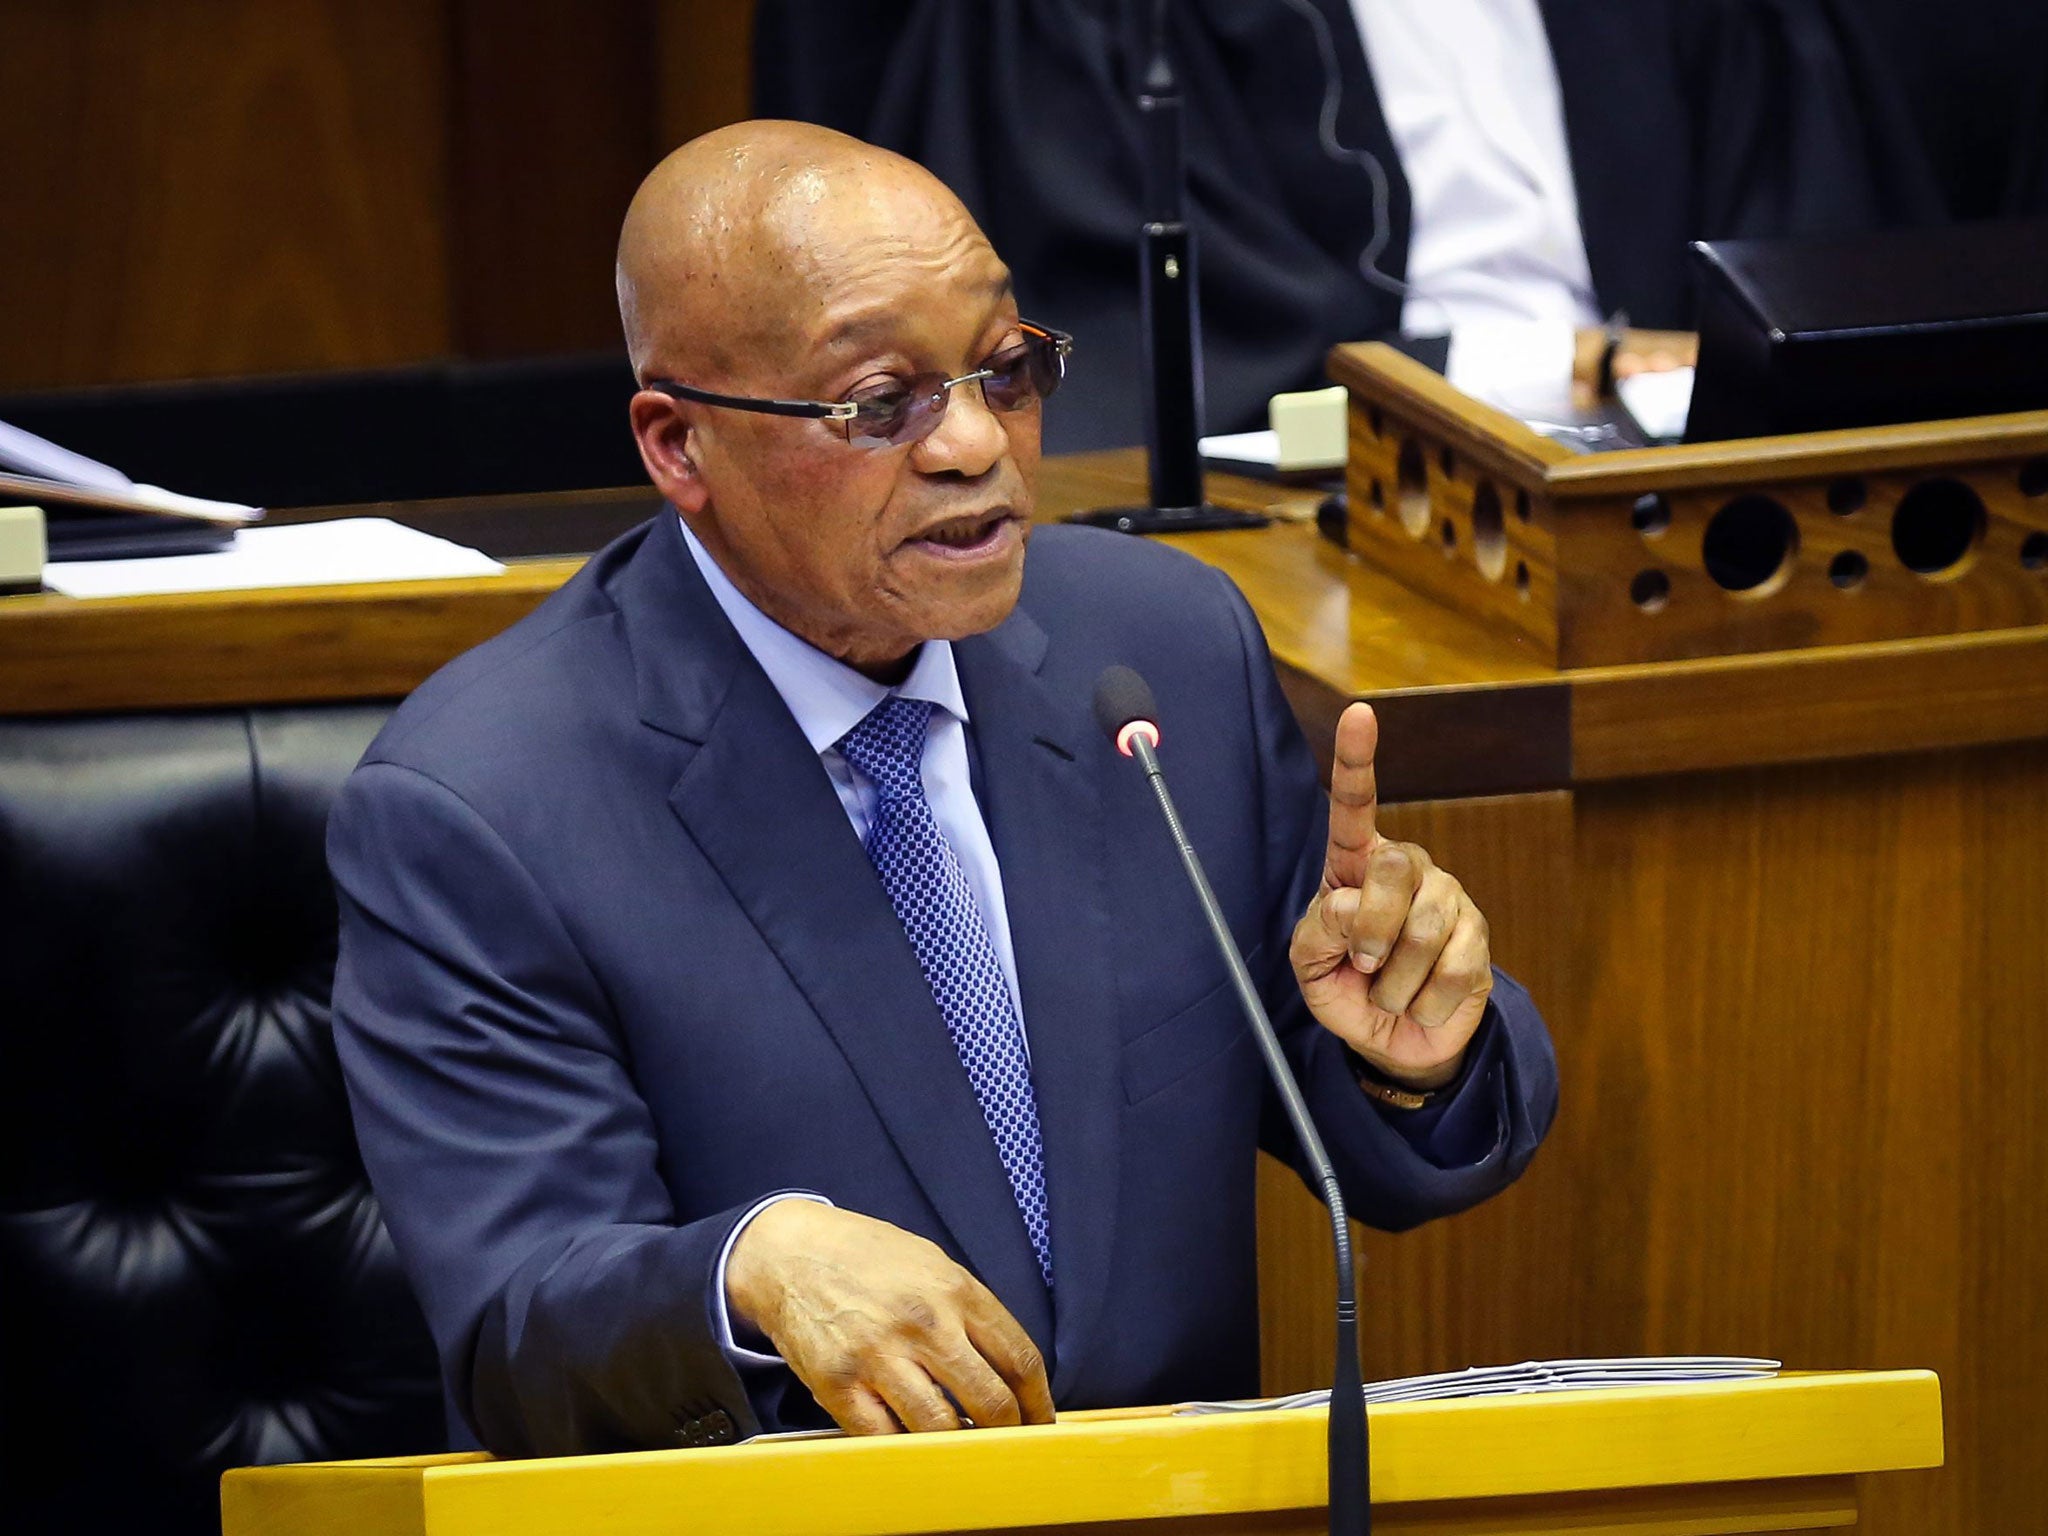 South African president Jacob Zuma during a question and answer session in Parliament in Cape Town, South Africa